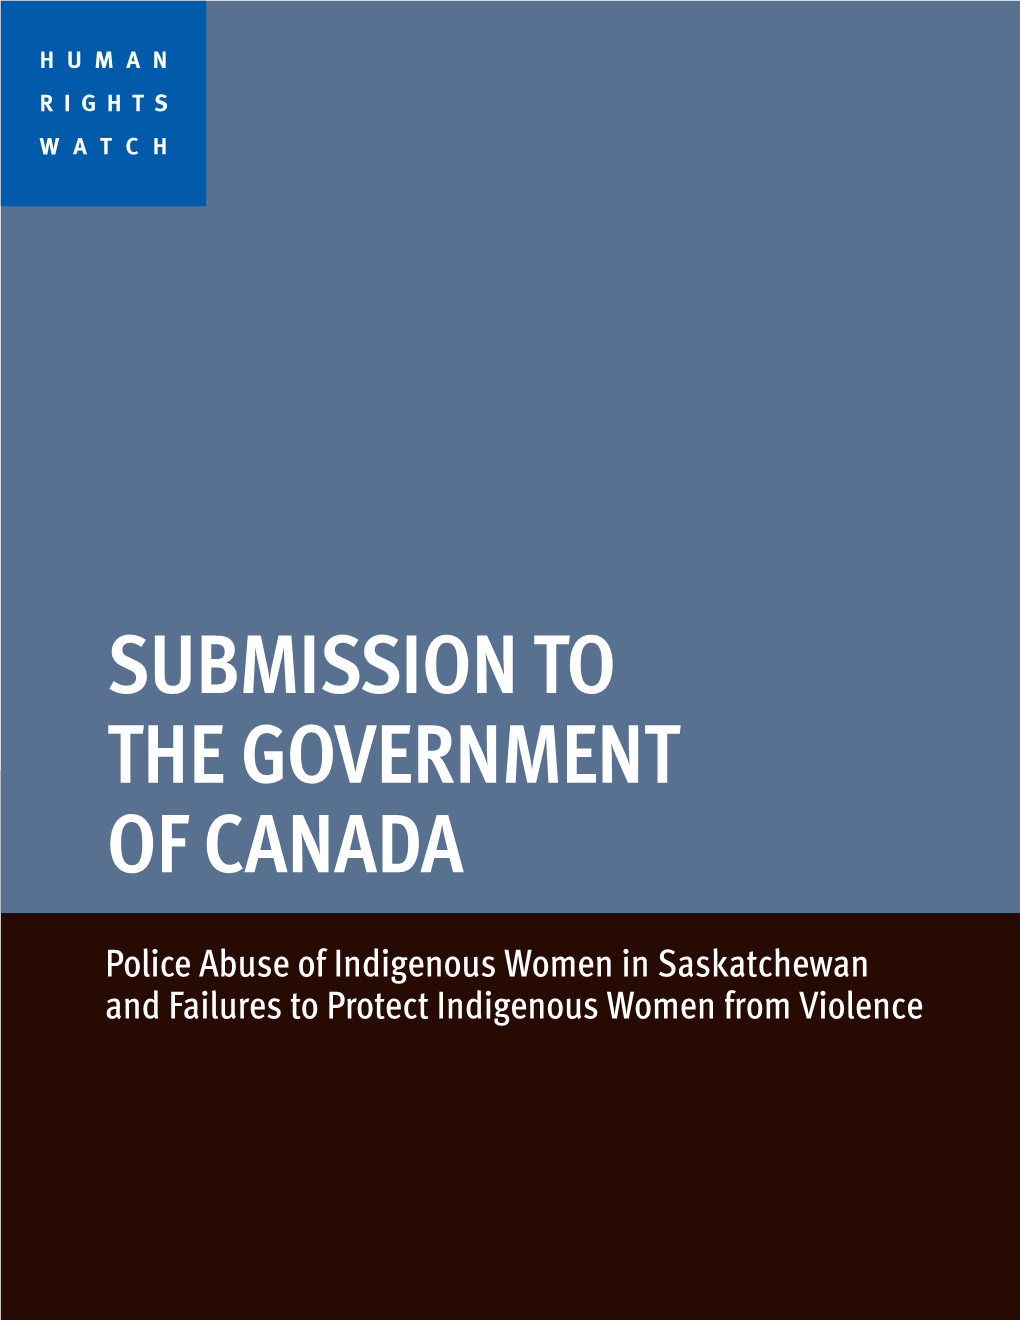 Submission to the Government of Canada on Police Abuse Of